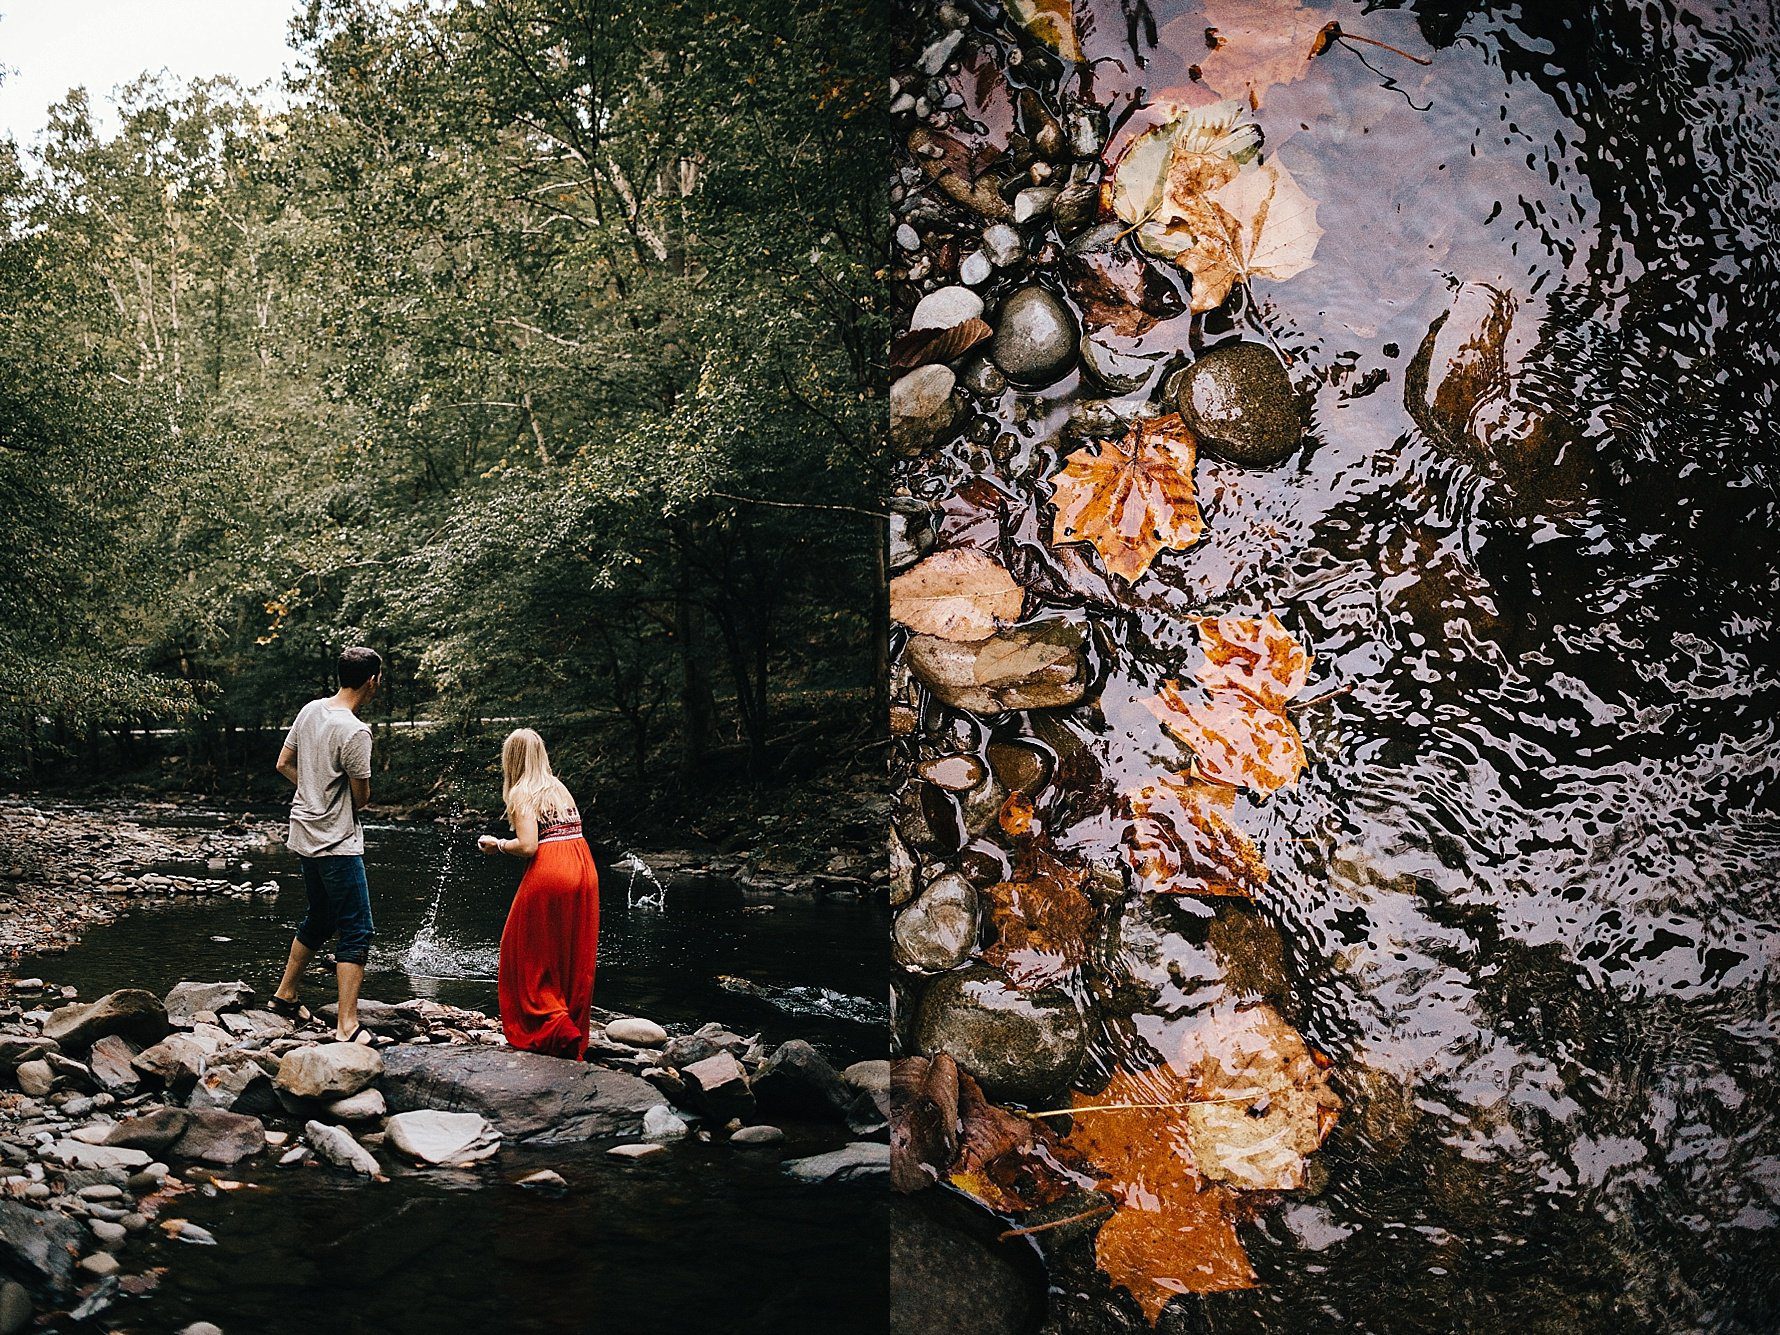 Engagement Photos in the Smoky Mountains | Erin Morrison Photography www.erinmorrisonphotography.com